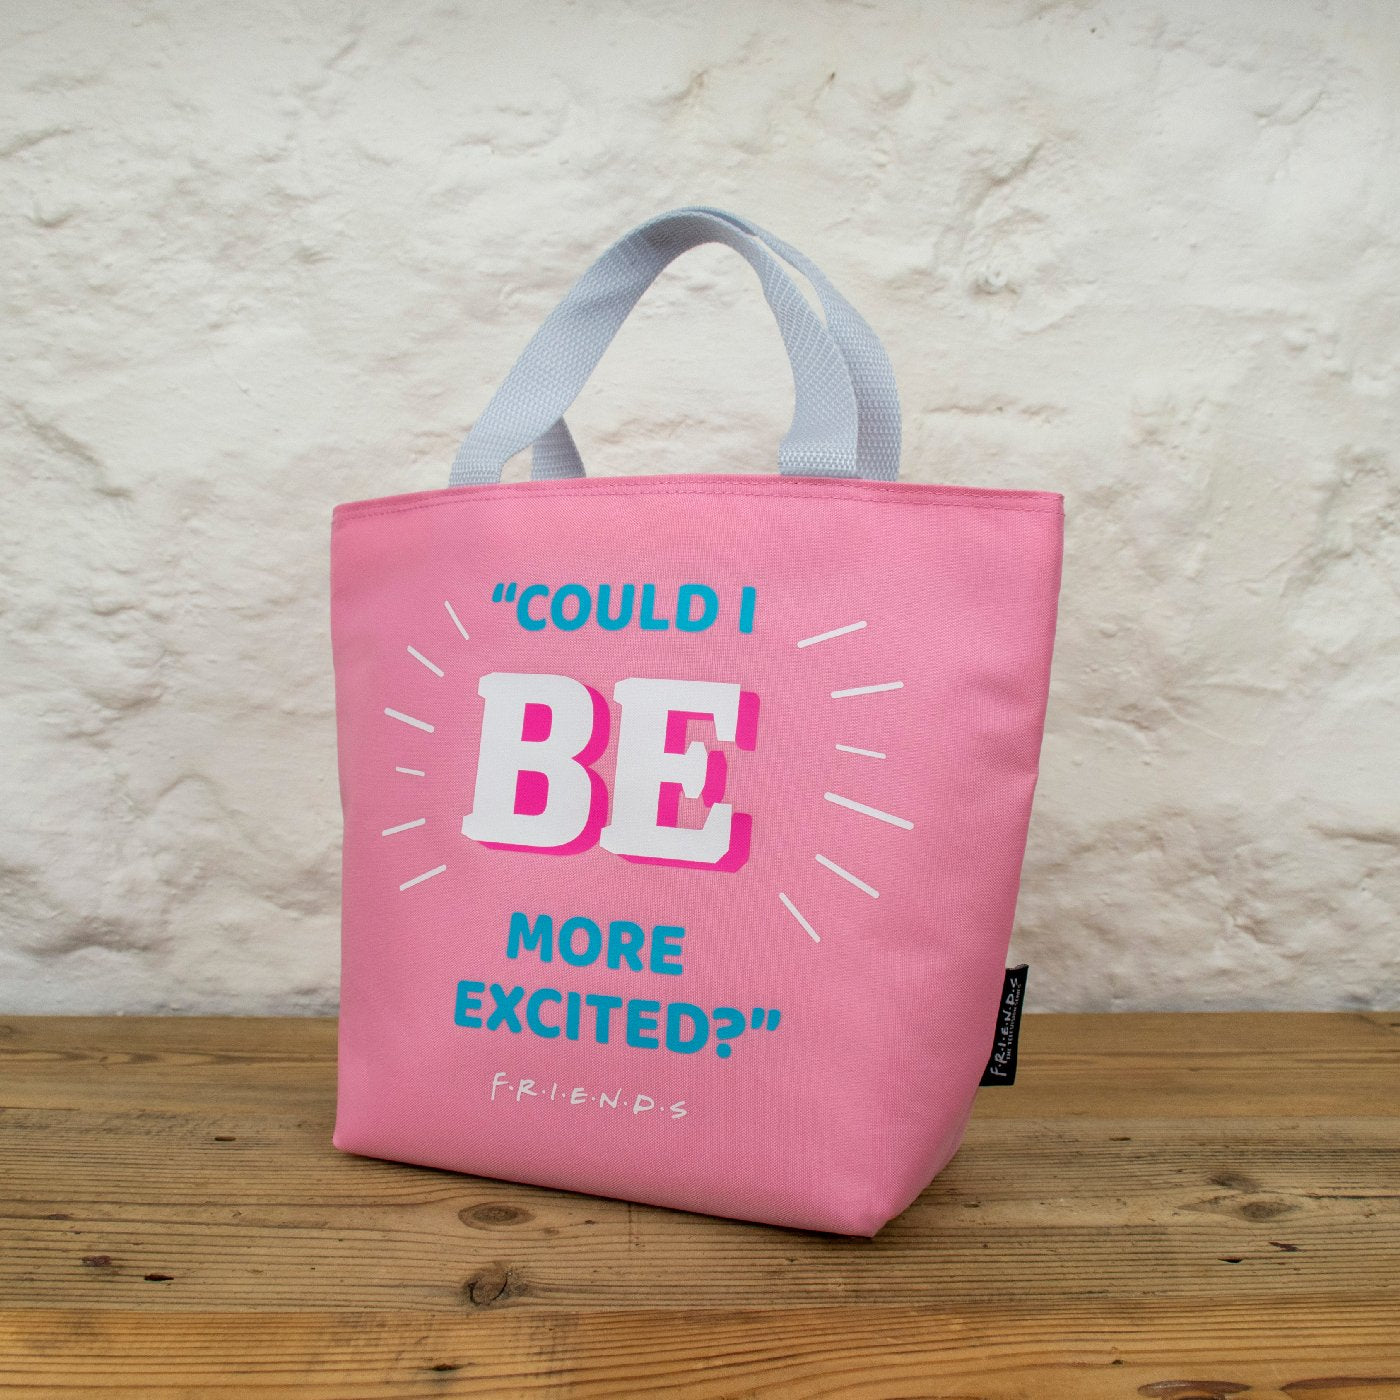  Friends: Pink Tote Lunch Bag  5060718145849